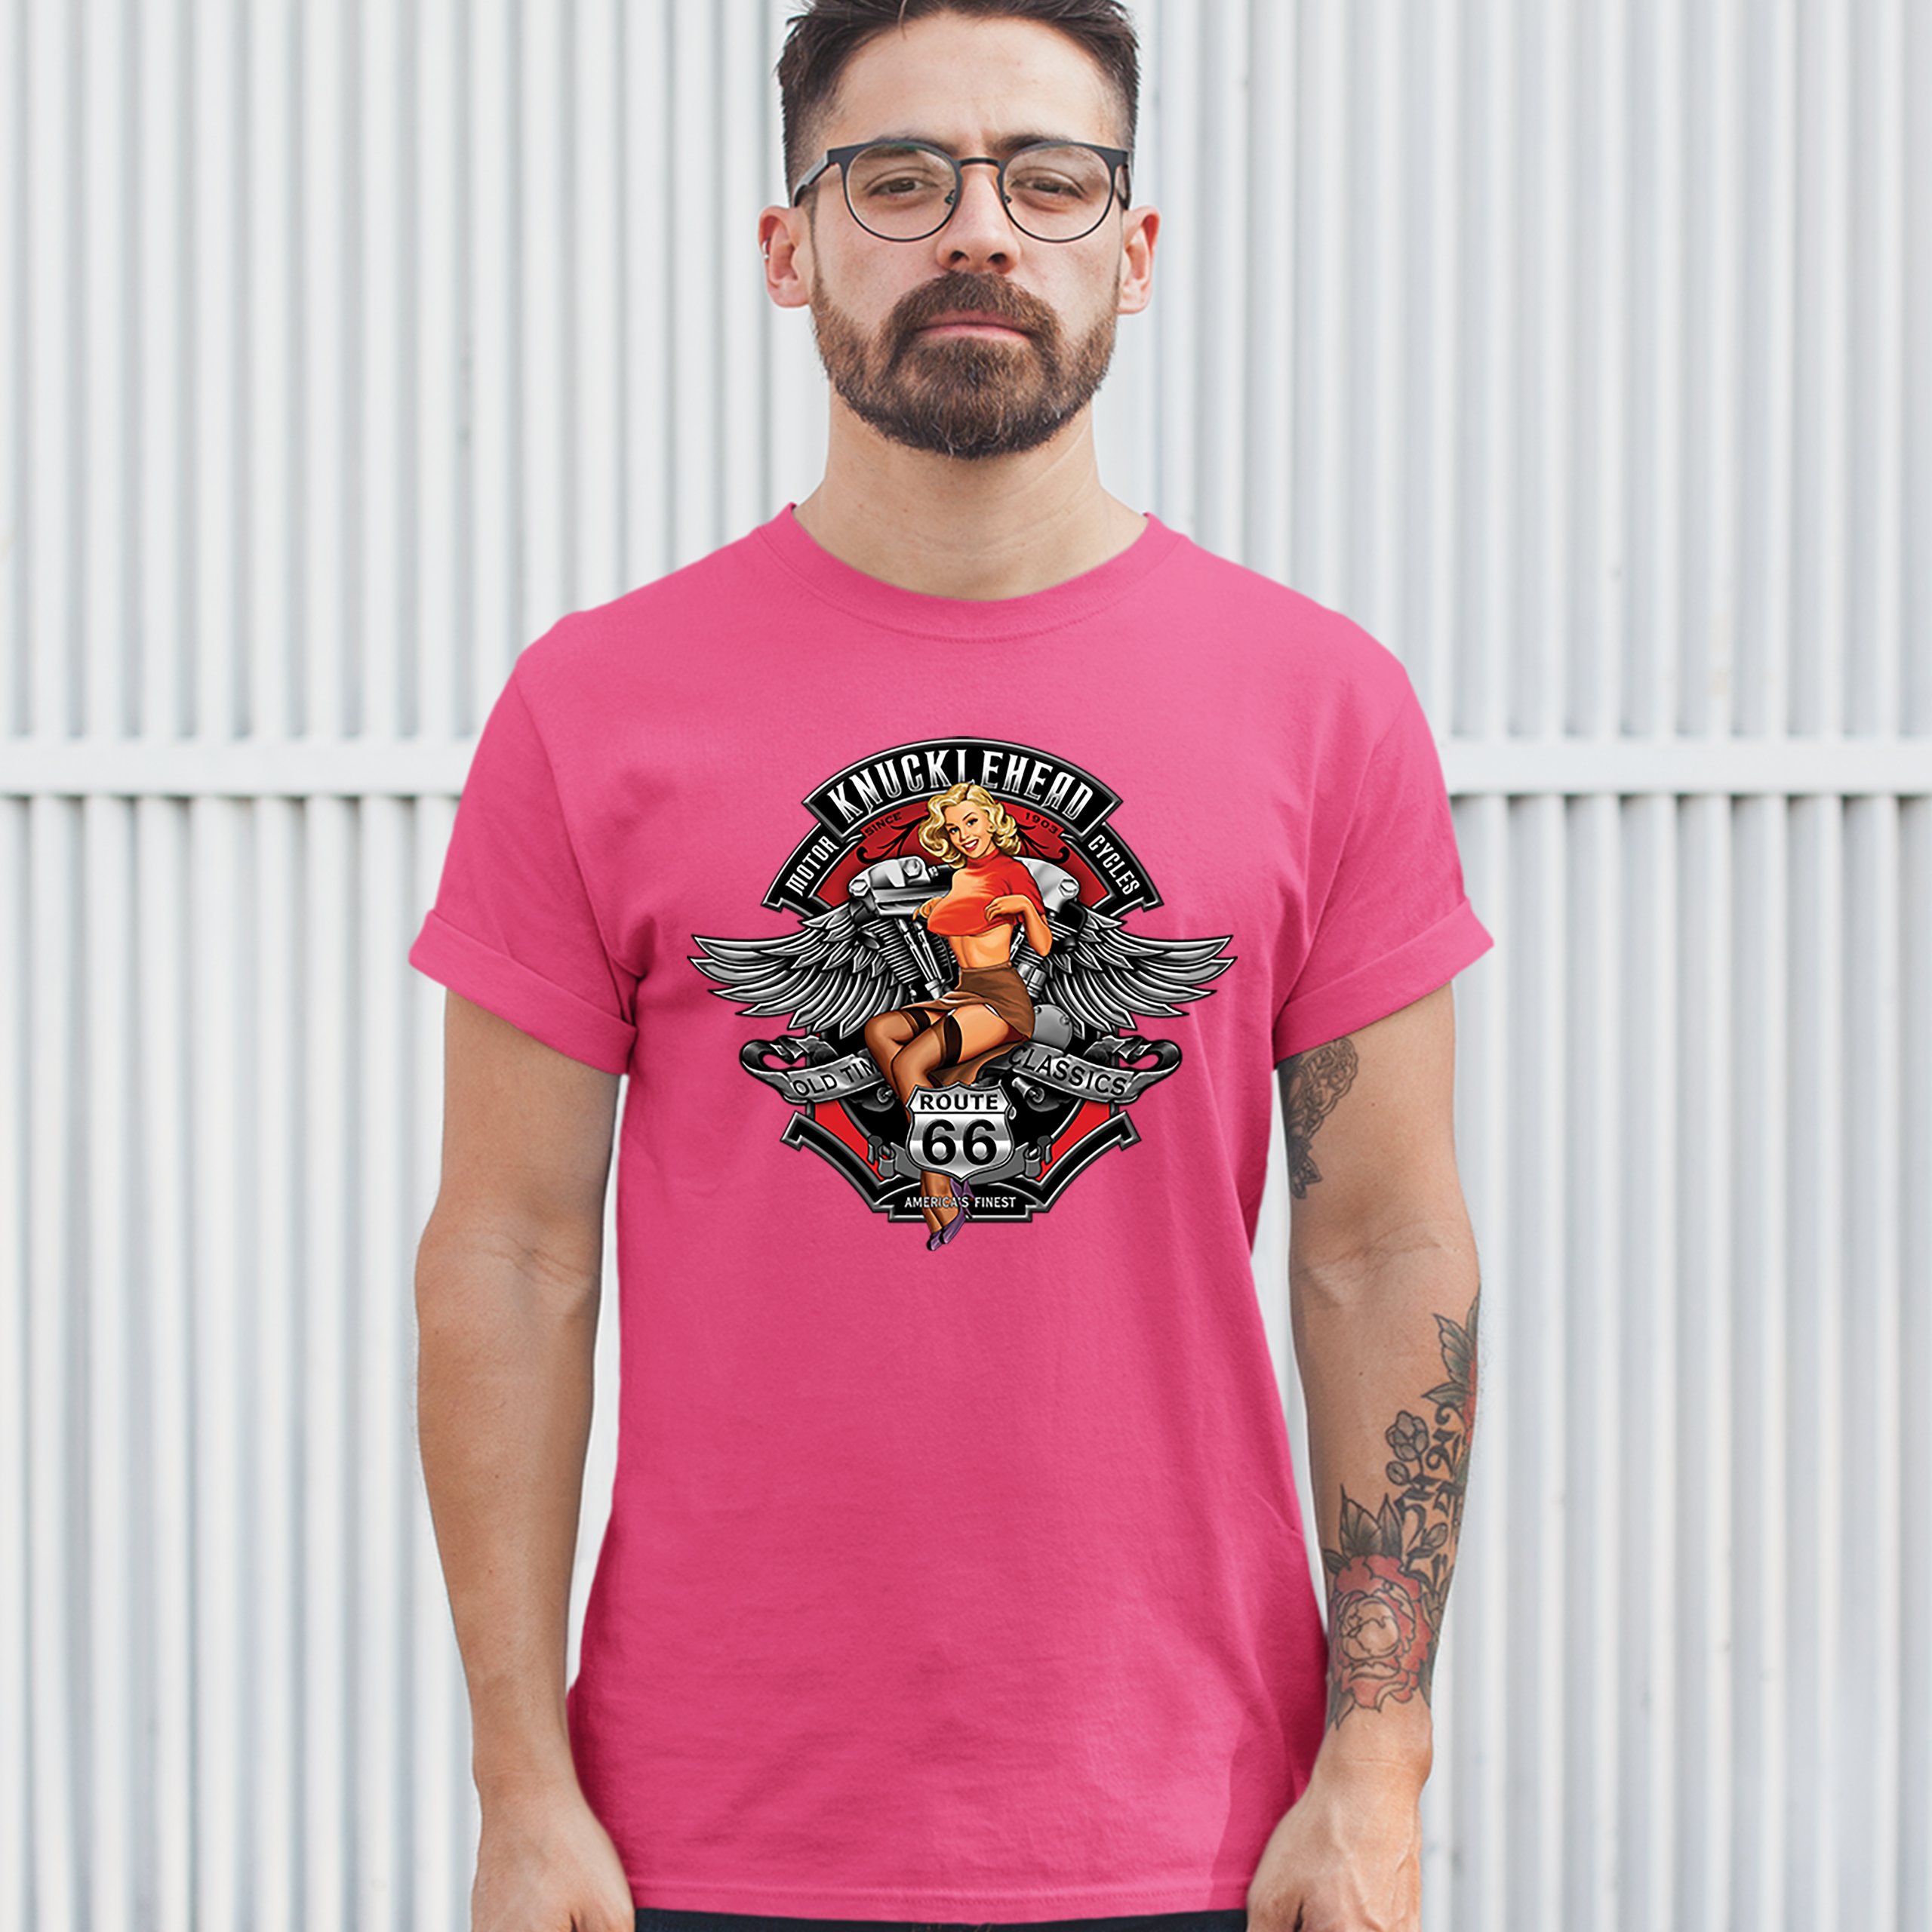 Knucklehead Motorcycles T-shirt Old Time Classics Pin-up Girl Biker Men ...